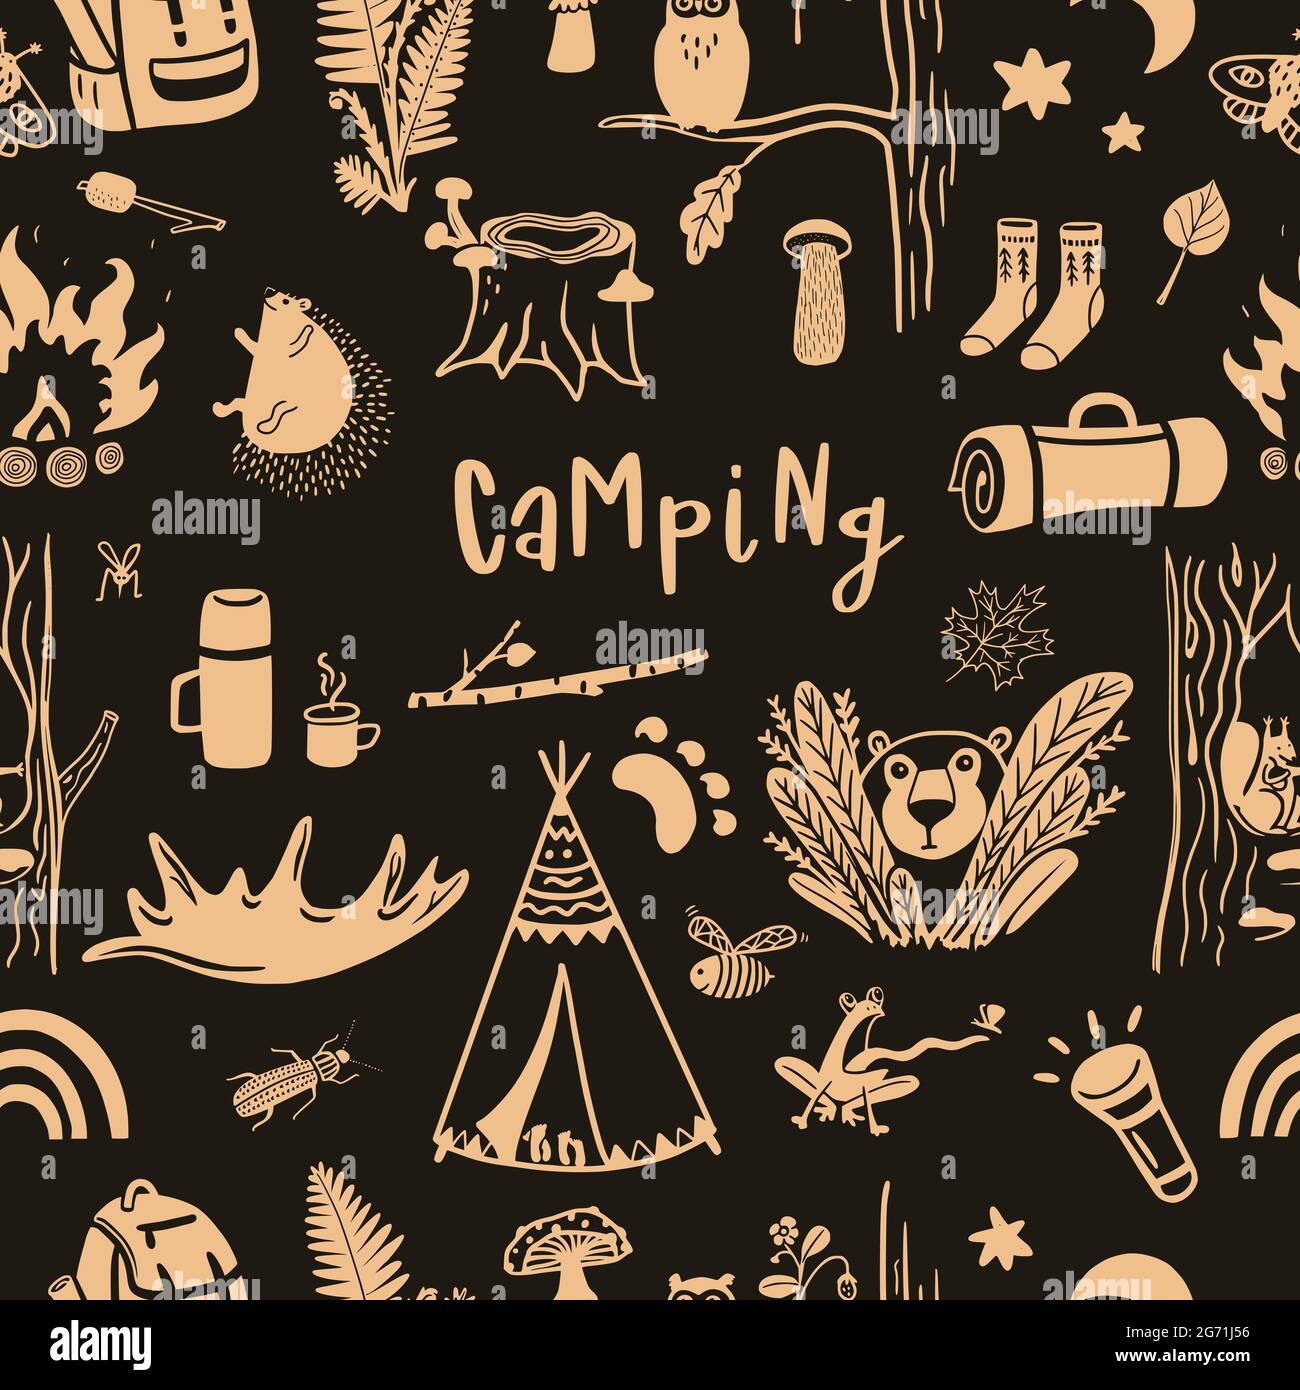 Camping hand drawn cute vector pattern against the dark background Stock Vector